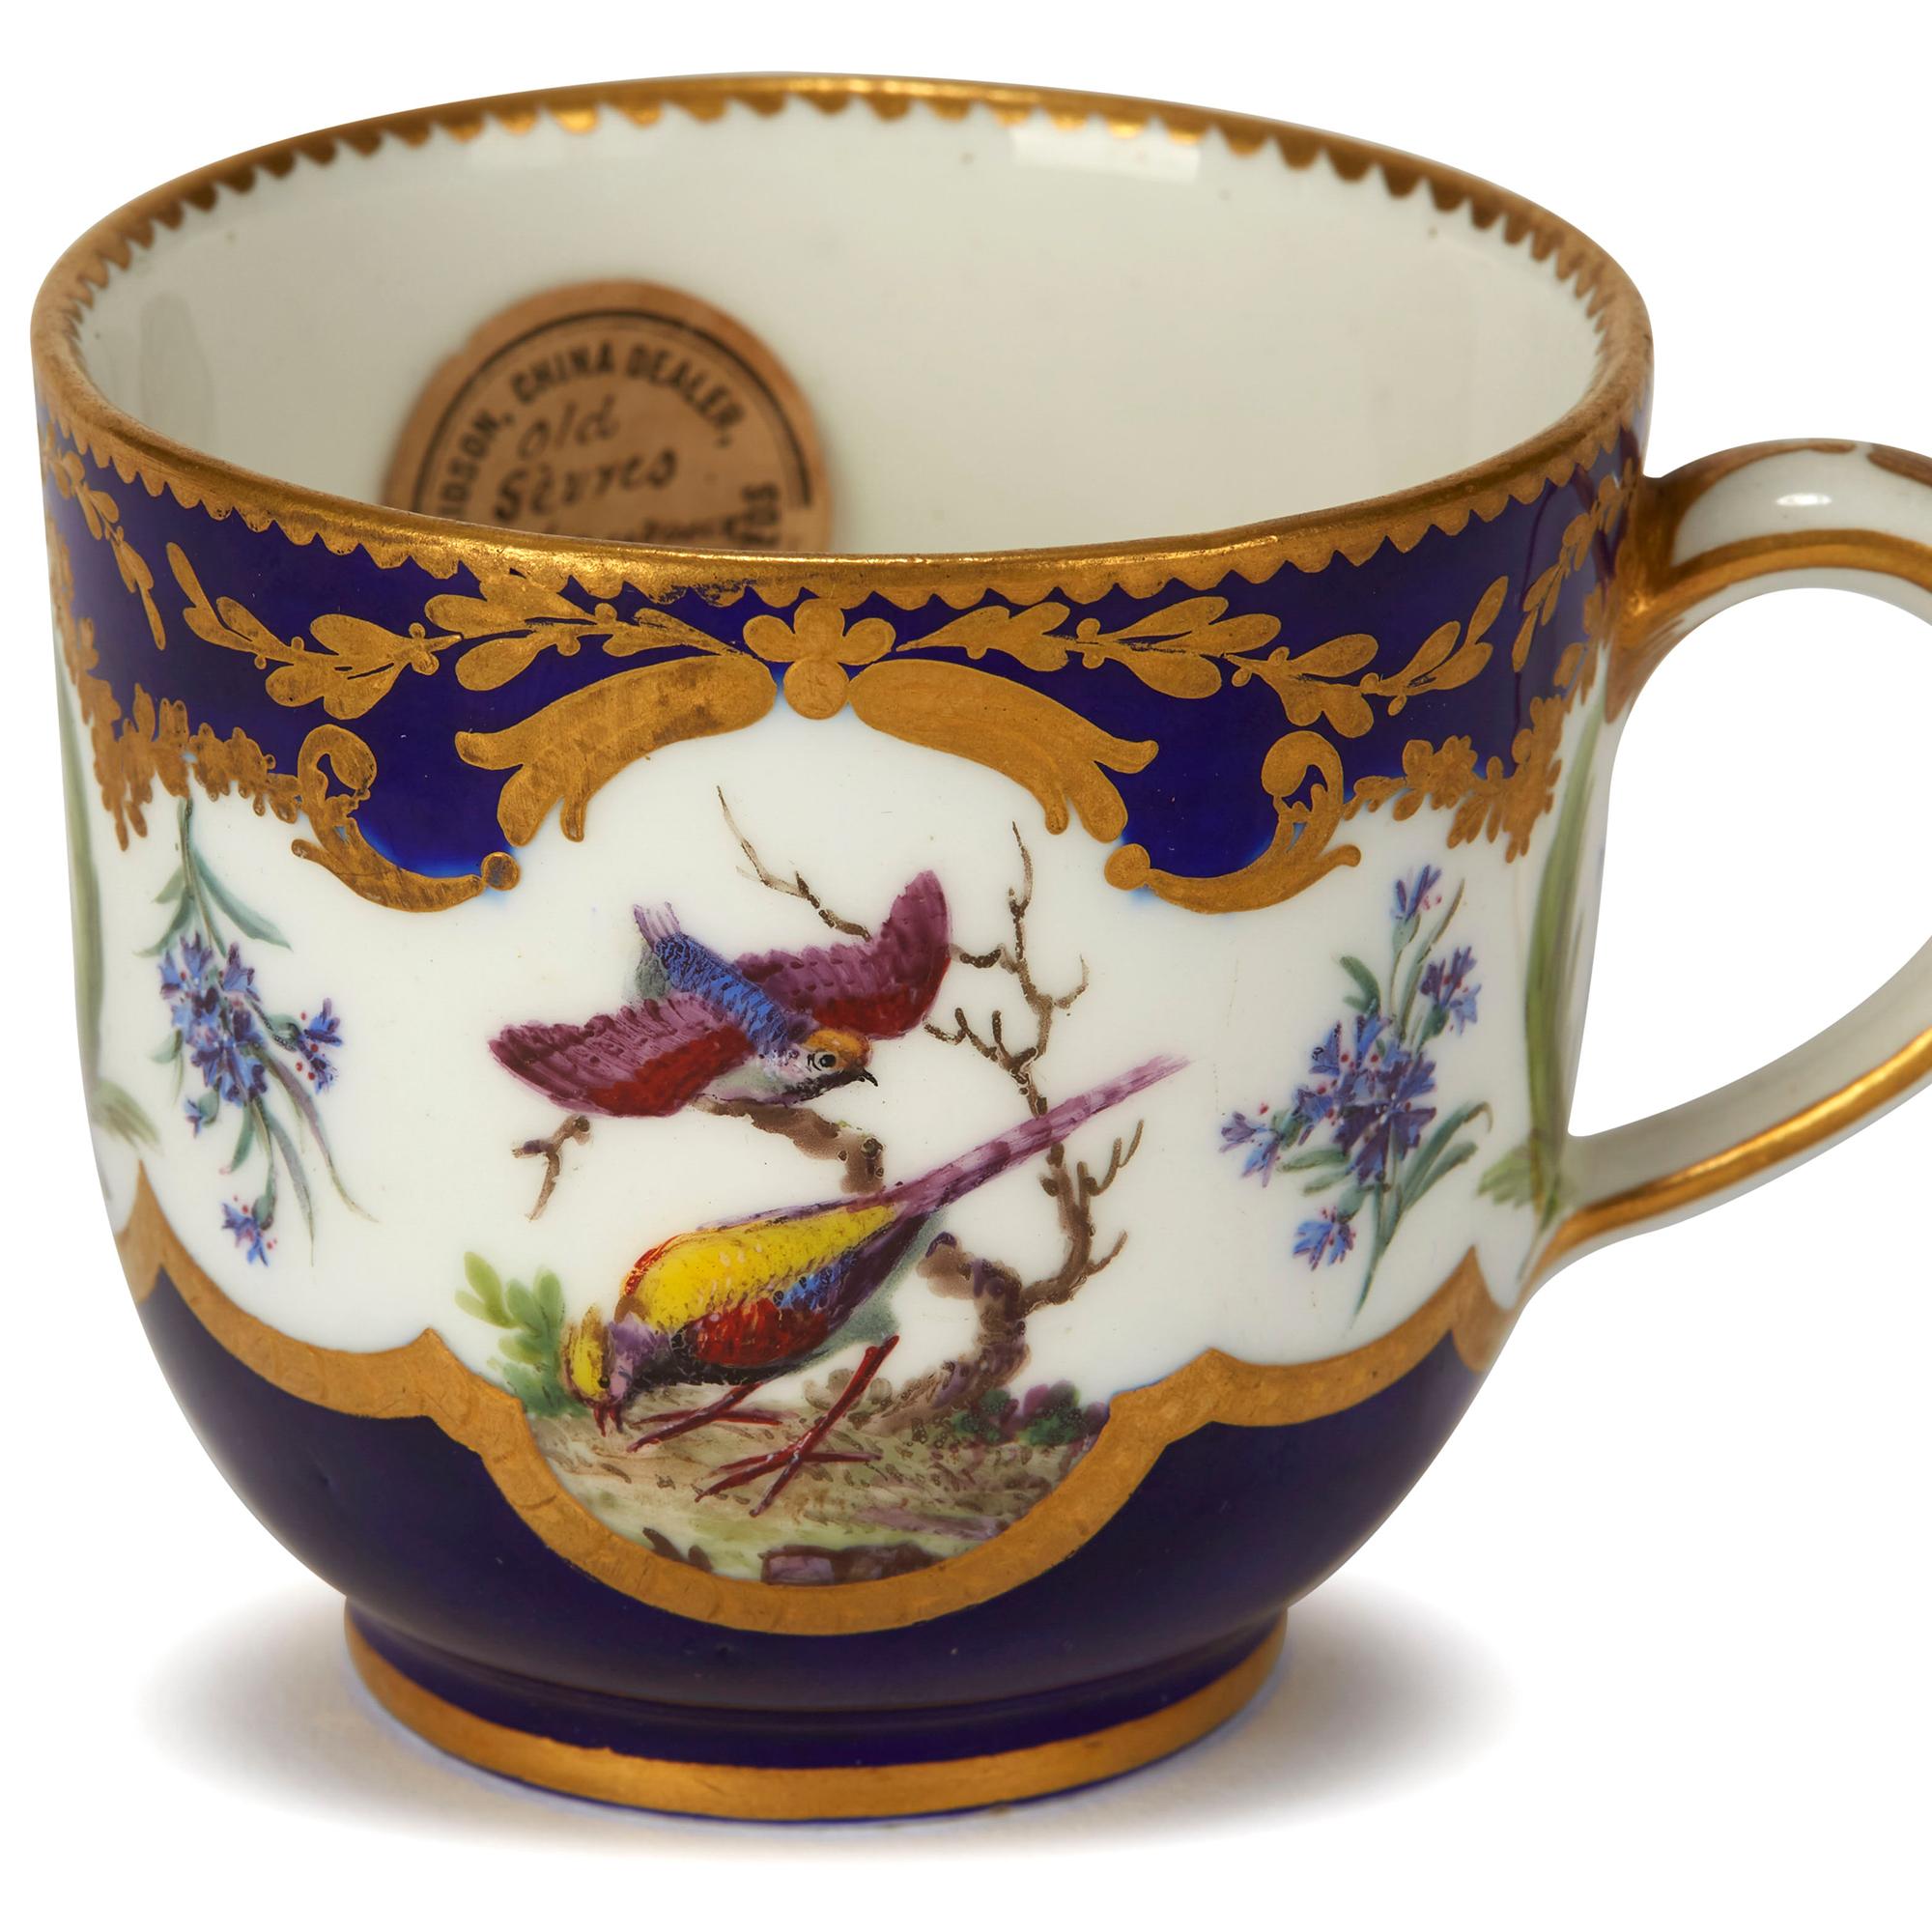 Sèvres French Porcelain Hand Painted and Gilded Teacup, circa 1752 4